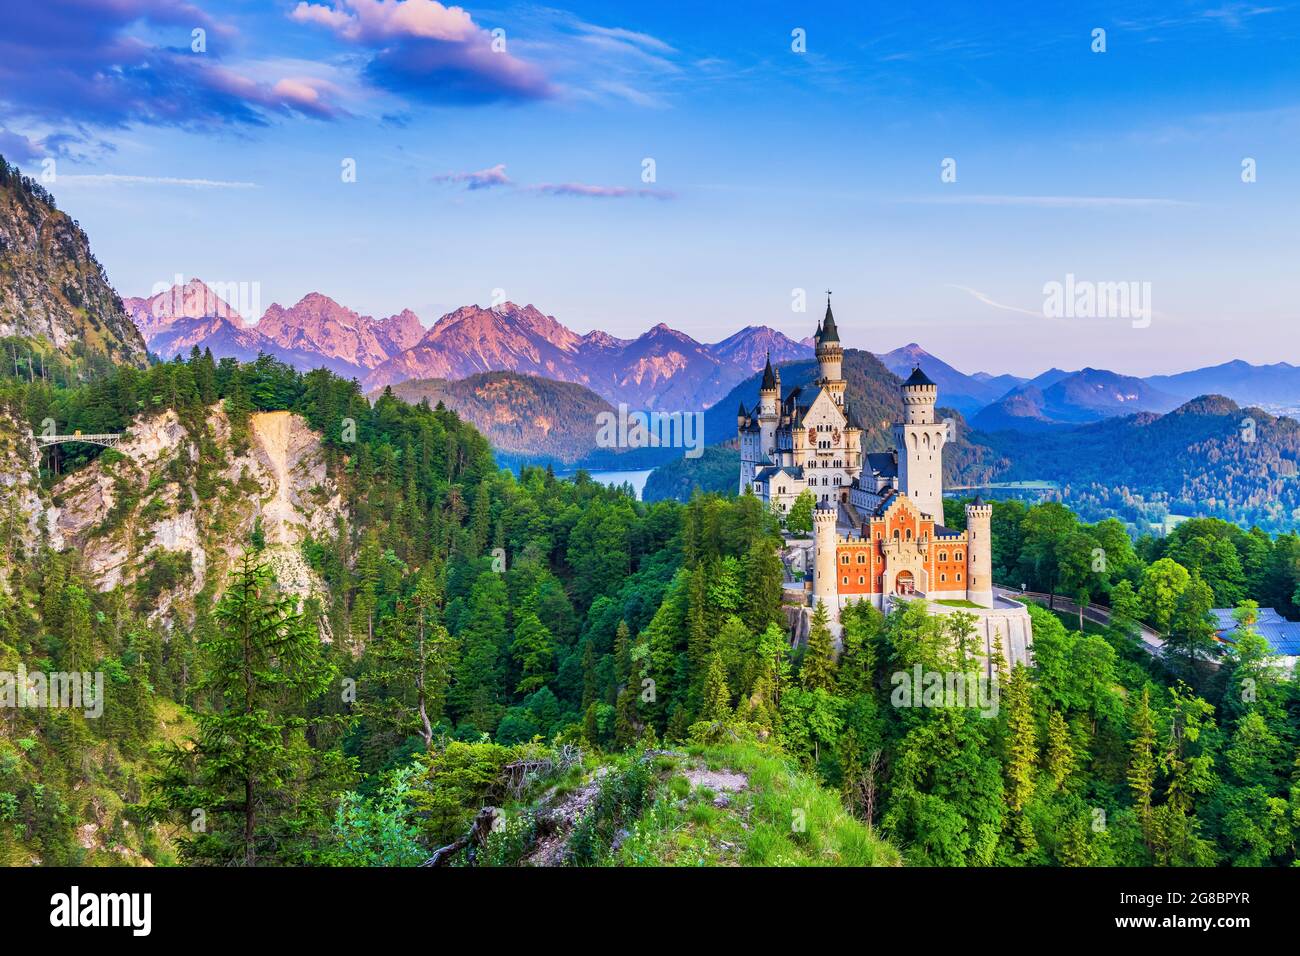 Neuschwanstein Castle, Germany. Front view of the castle and Queen Mary's bridge. The Bavarian Alps in the background. Stock Photo